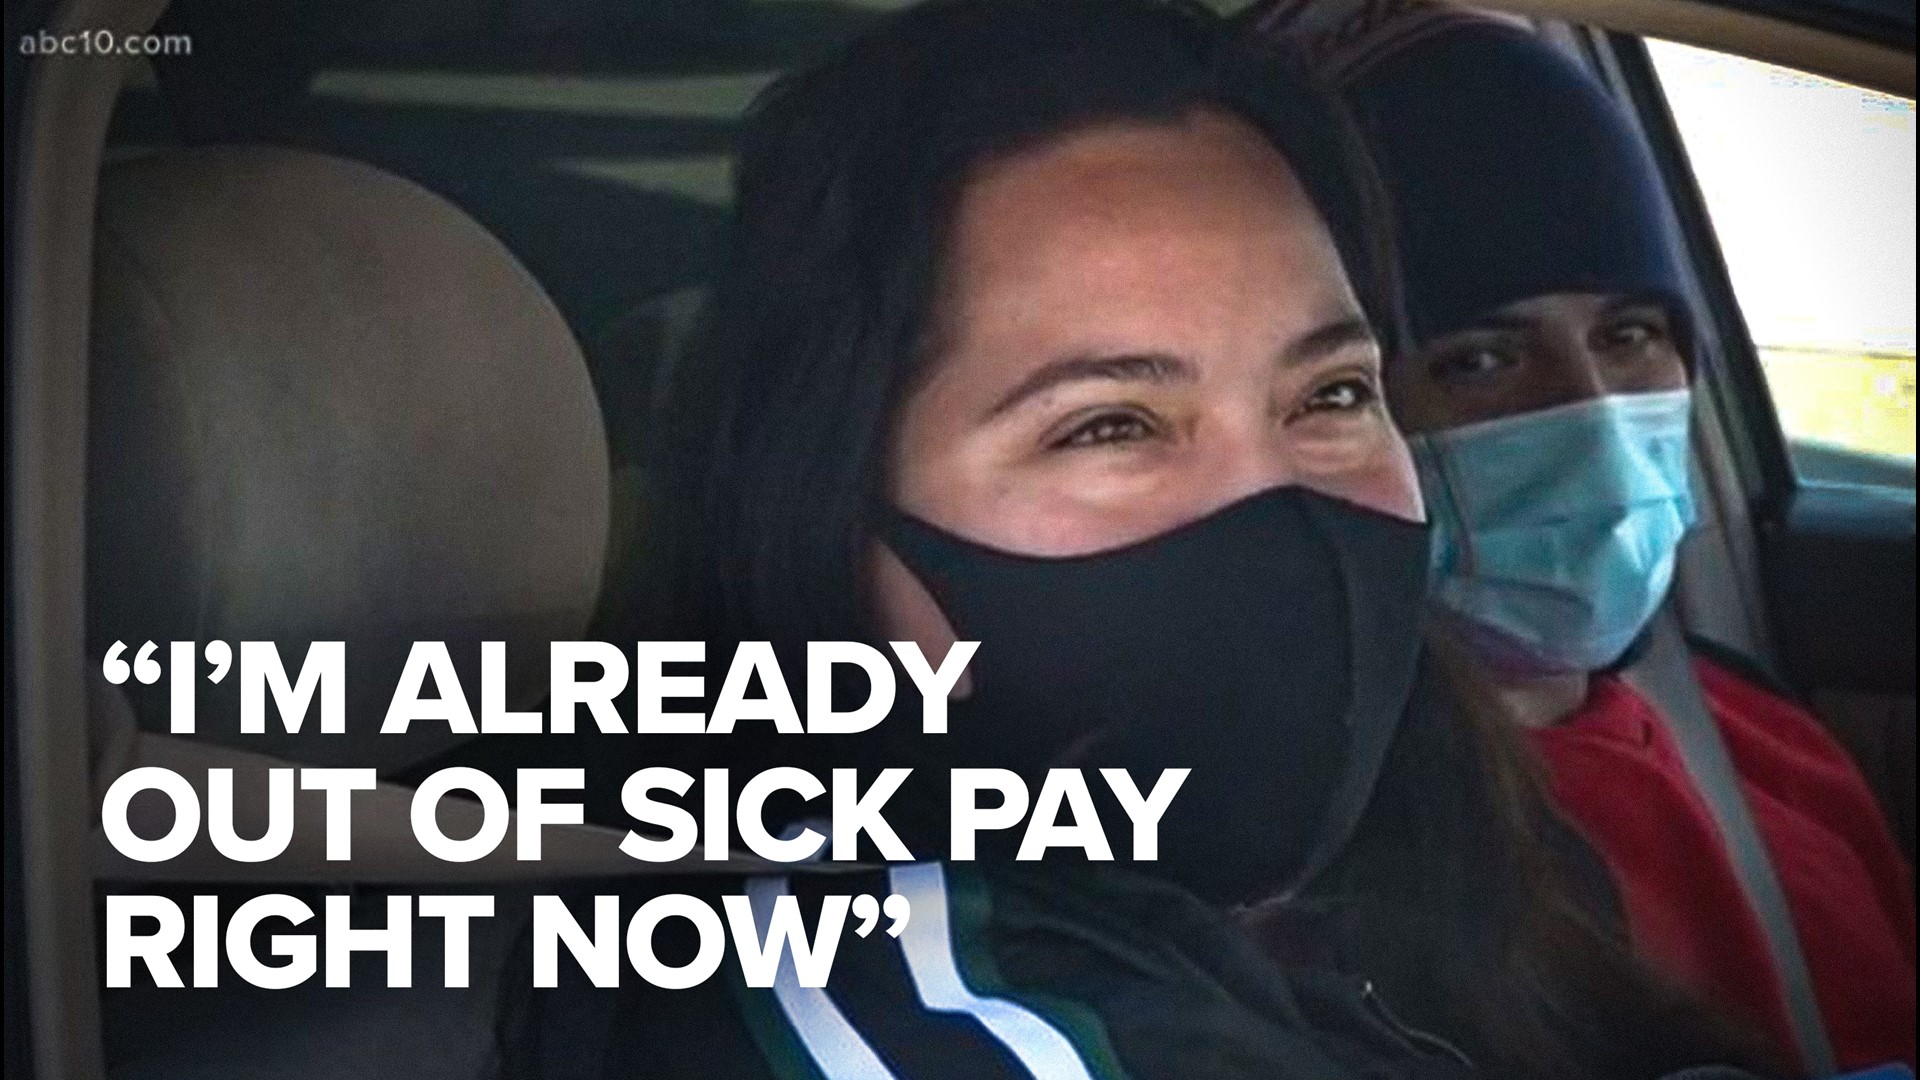 Initially expiring Oct. 1, 2021, two more weeks of sick pay could be available to Californians through Sept. 30, 2022 if a proposal in the state legislature passes.